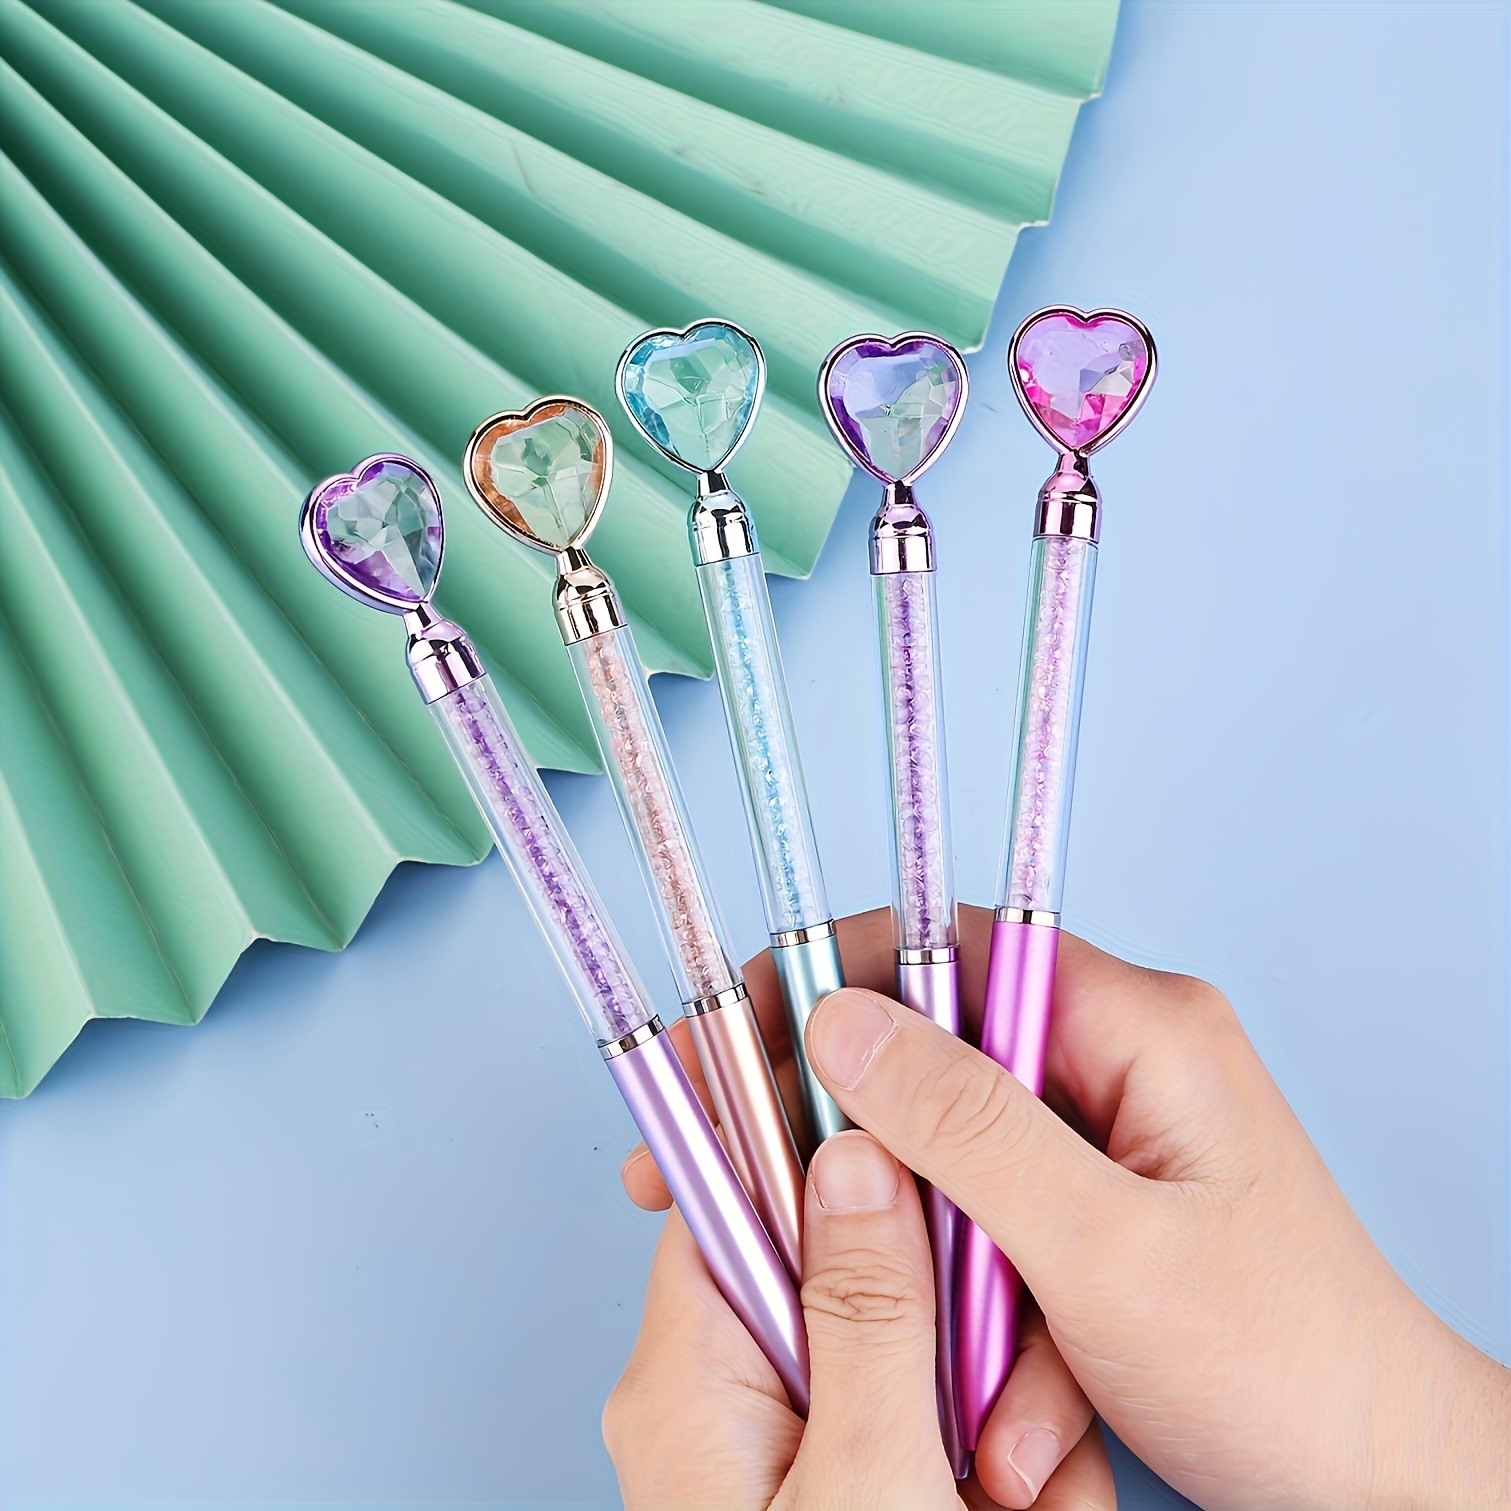 

10-piece Sparkling Diamond Heart Ballpoint Pens - Colorful Crystal Quicksand Design With Faux Metal Barrel, Medium Point